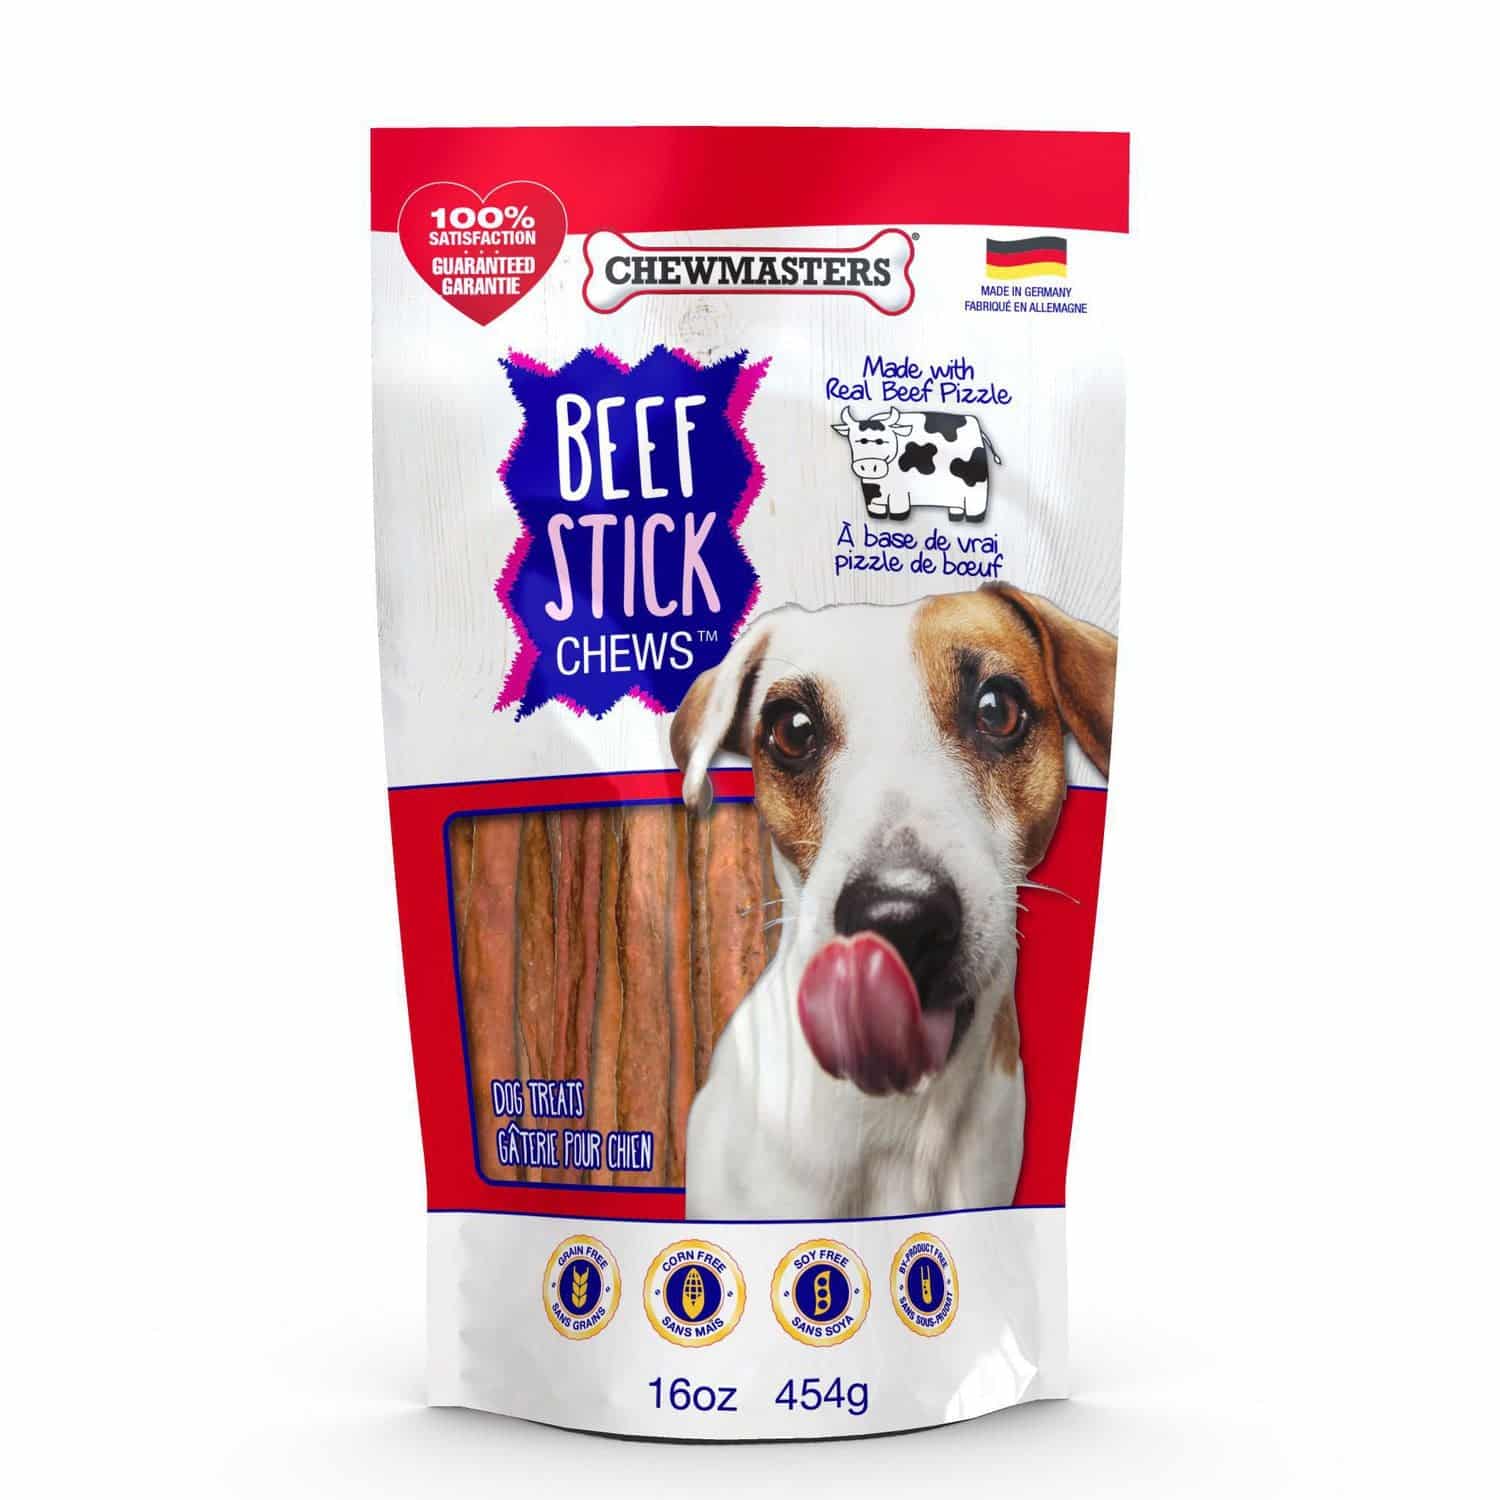 ChewMasters Beef Stick Chews - Bag